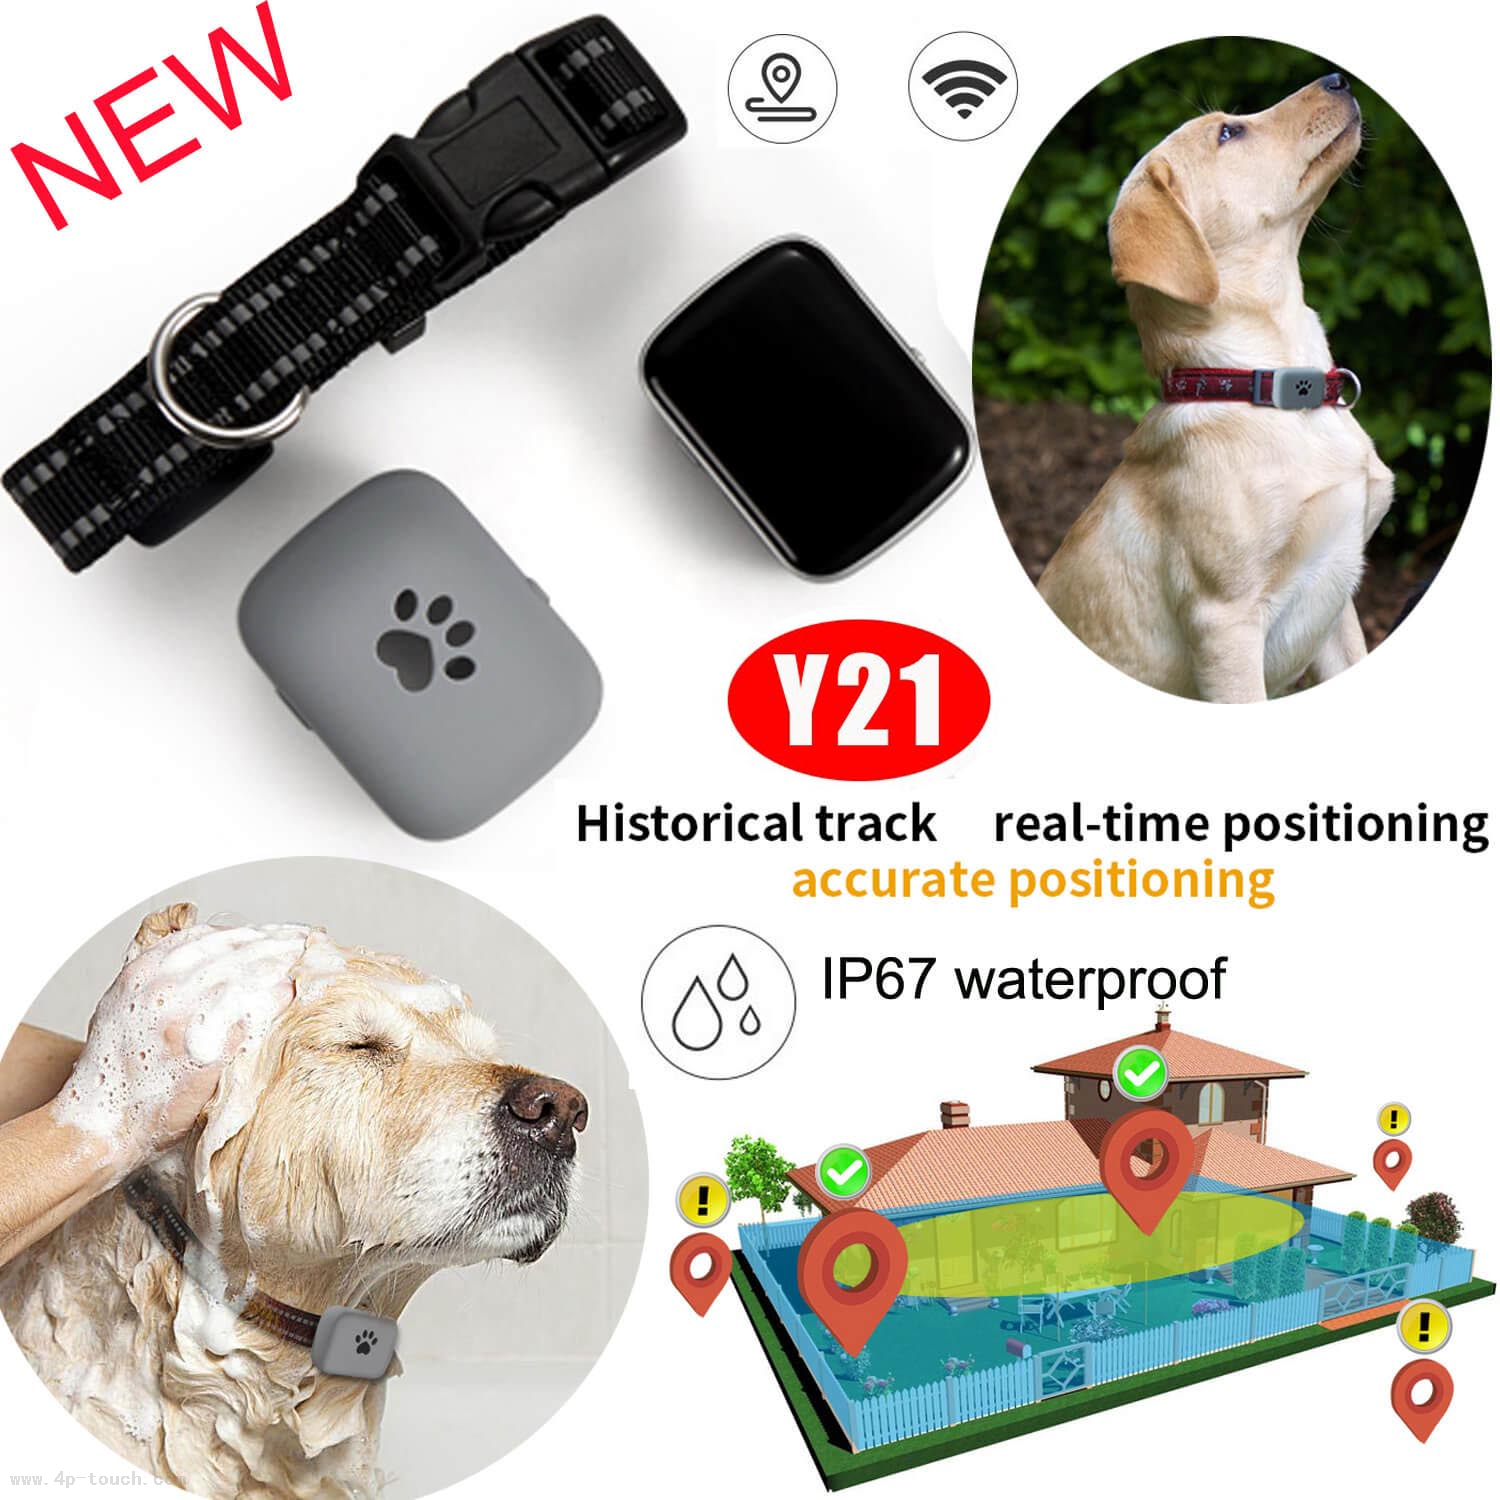 2G Gadget GPS Tracker for Dog/Cat pets Animal Security 